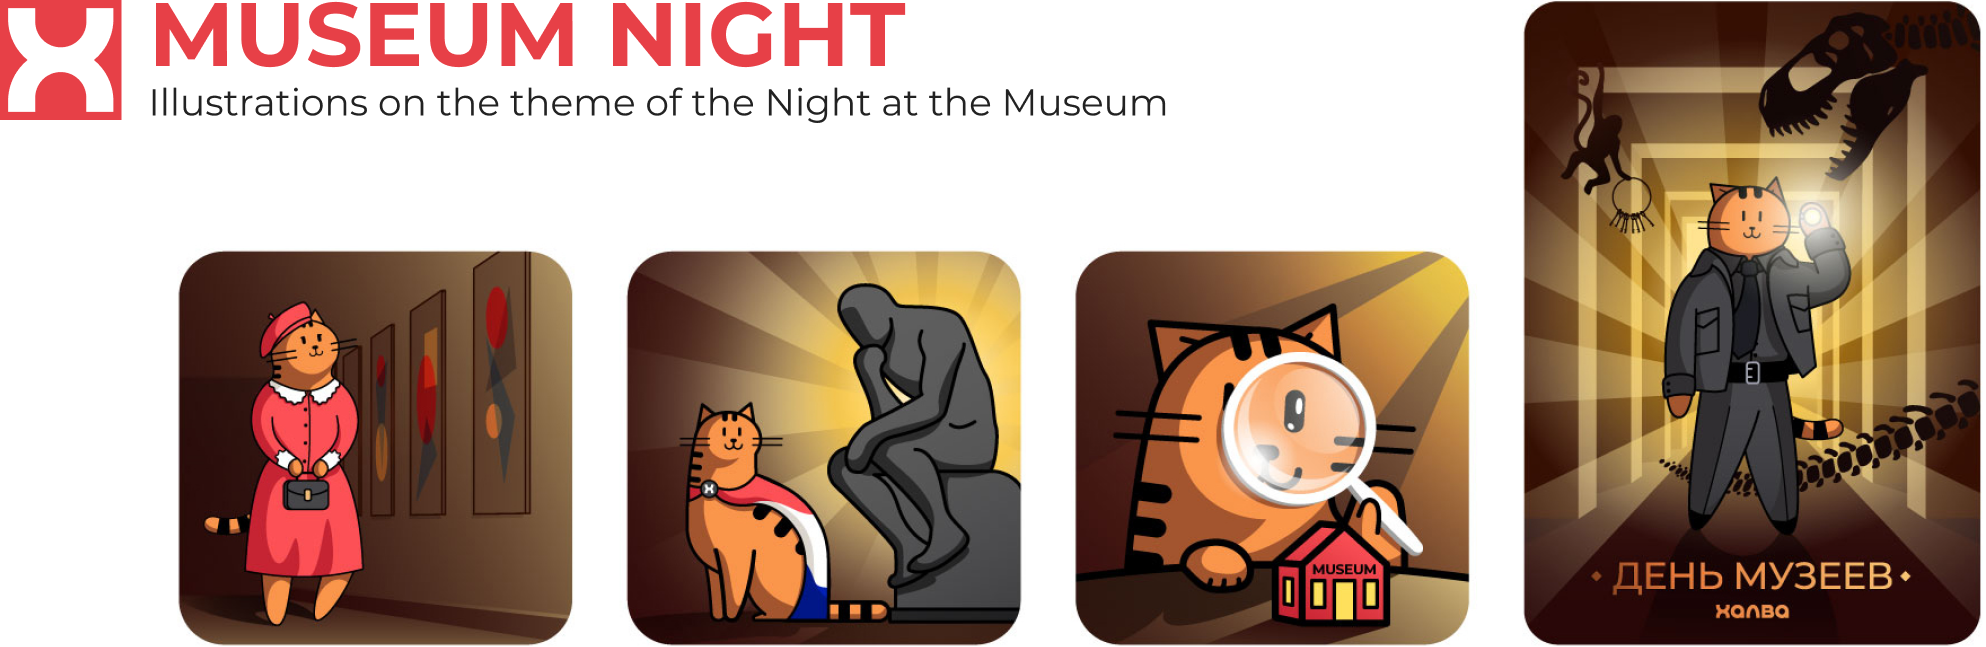 Museum Night: Illustrations on the theme of the Night at the Museum